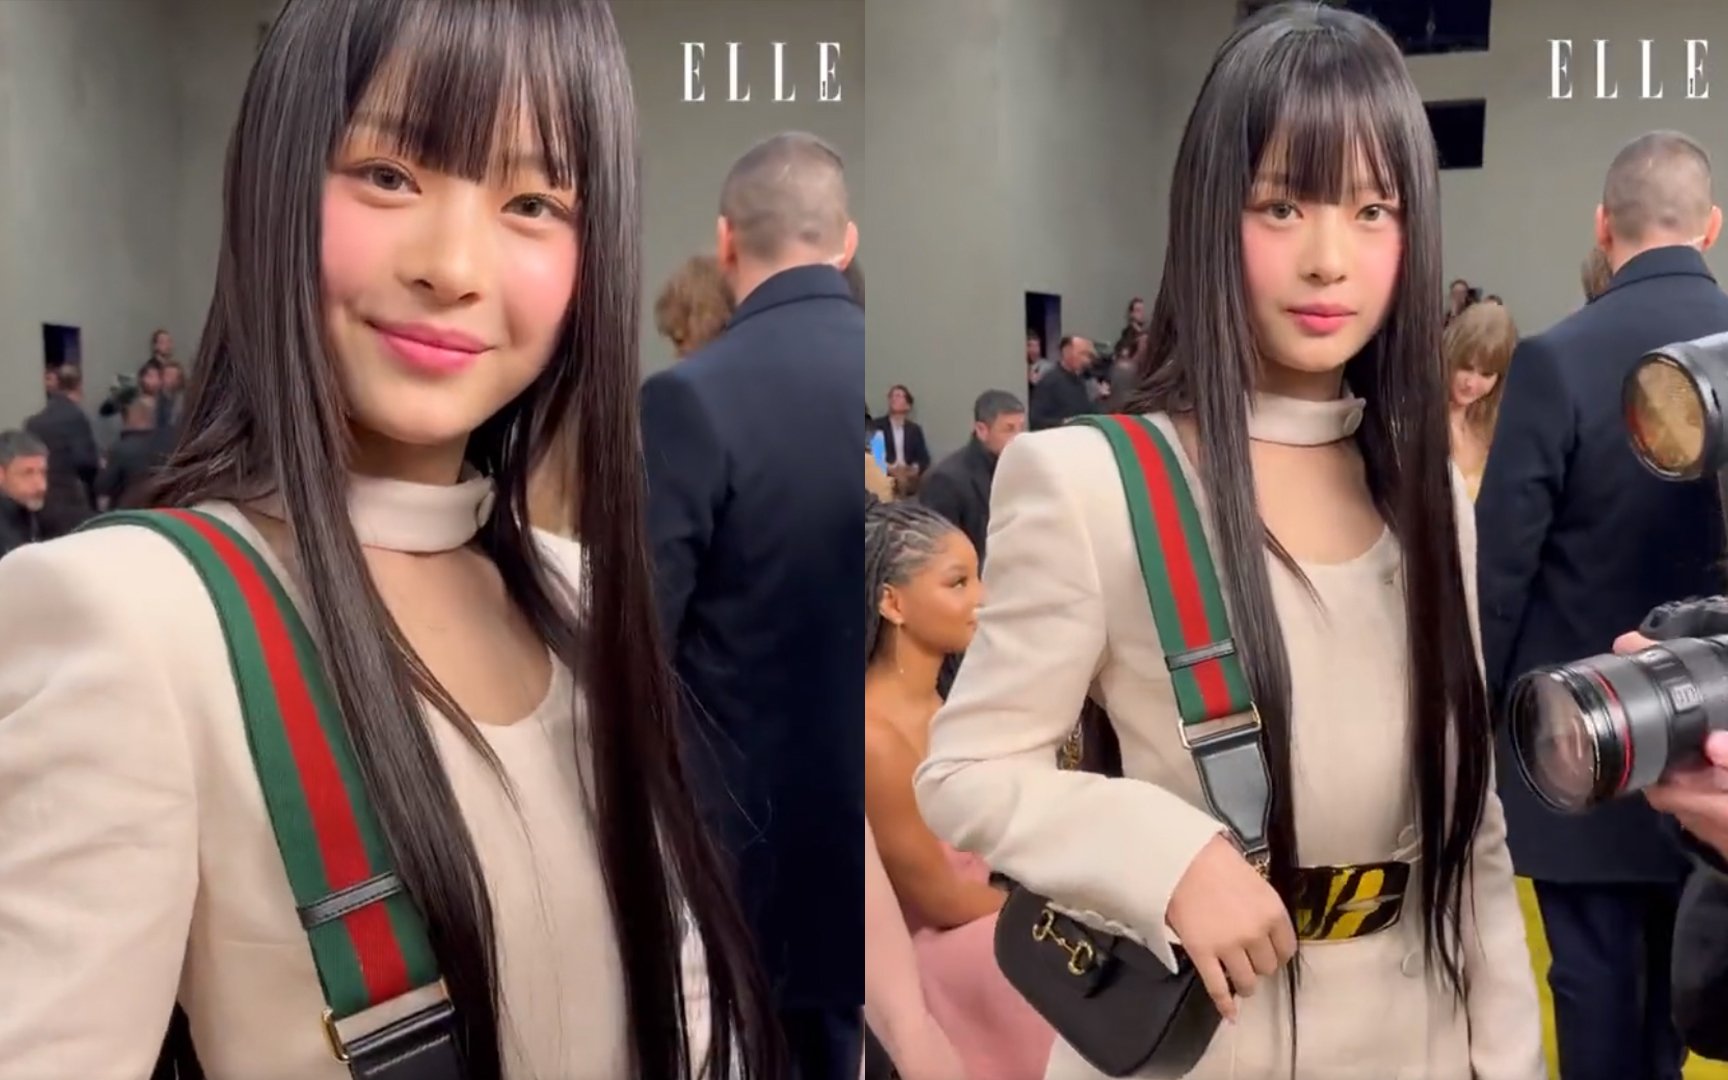 NewJeans' Hanni attends her first Gucci event in Milan